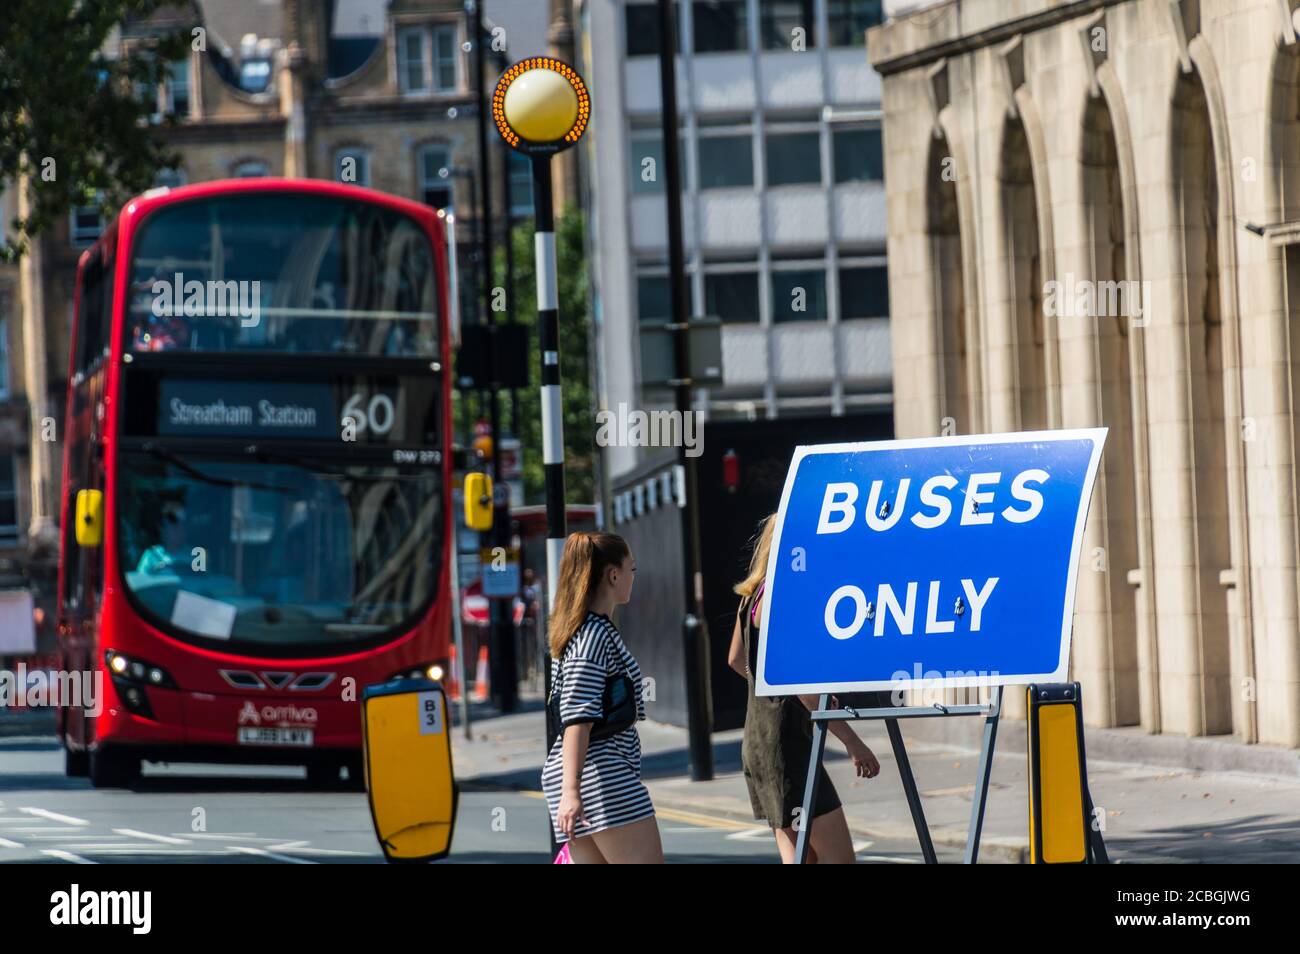 Buses only blue sign board with a red london bus in background Stock Photo